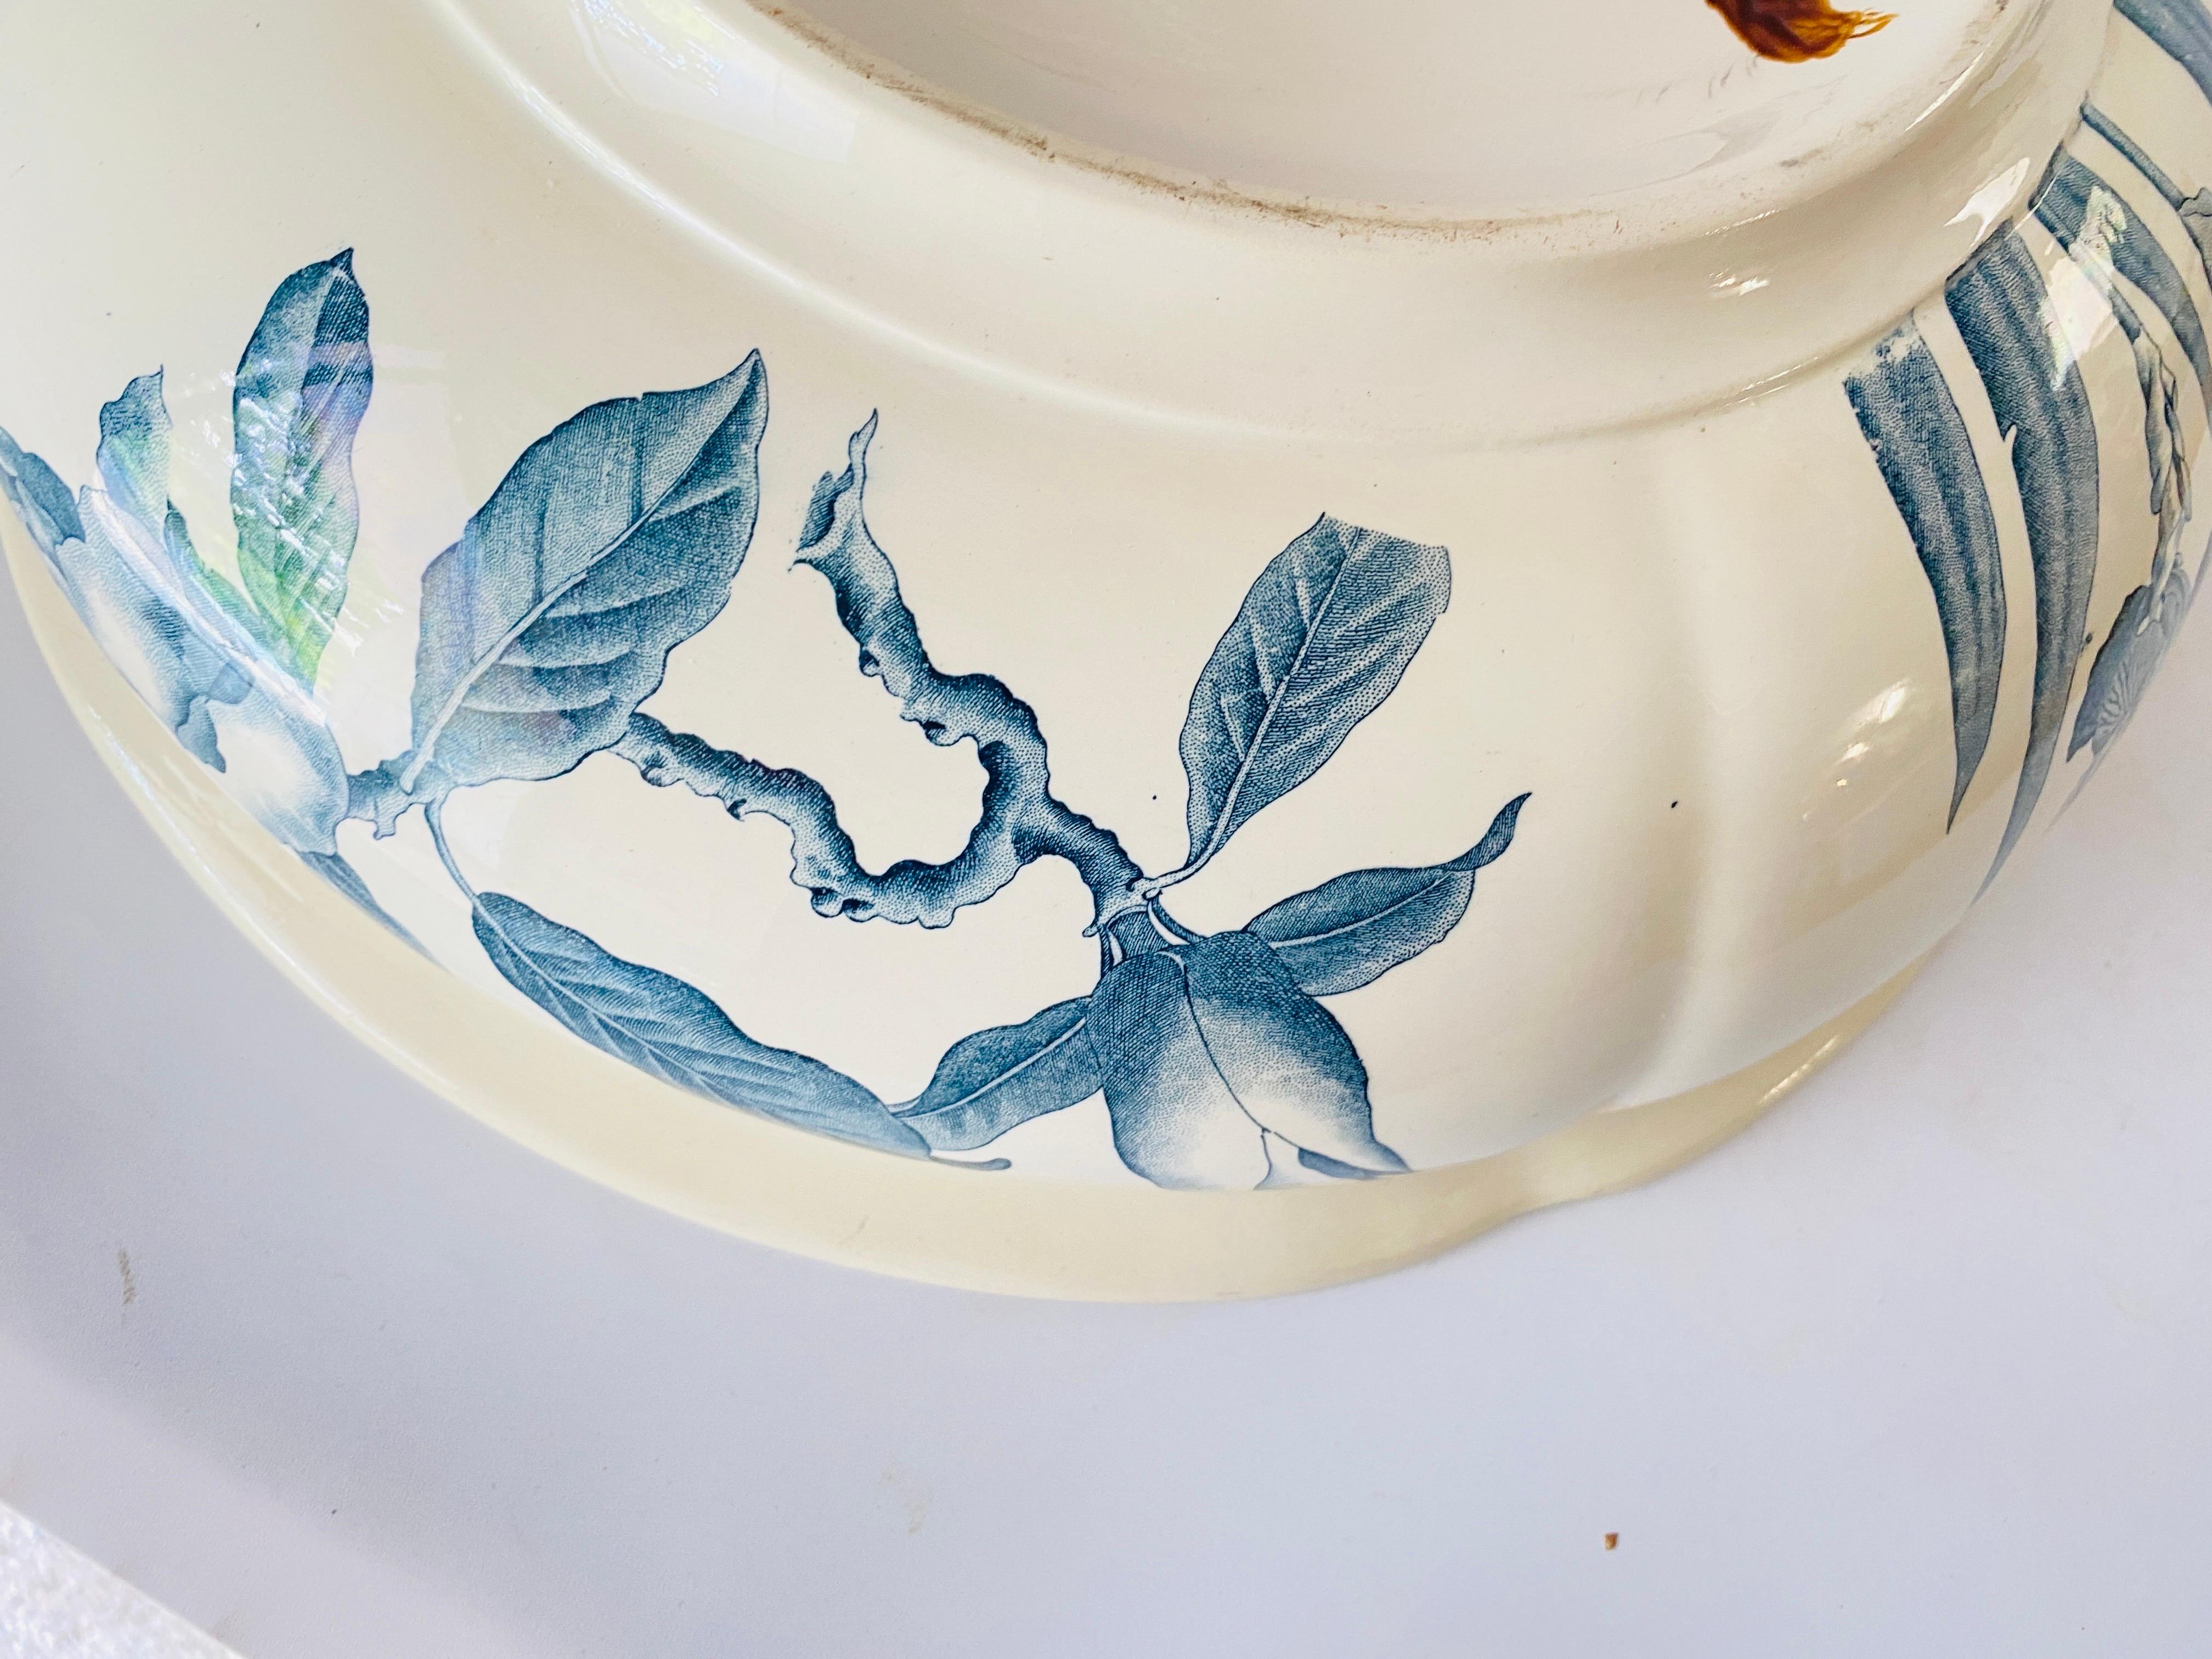 1880 circa glazed large ceramic basin by Magnolia B.F.K.
Internal profiling hand decorated in blue with decorative flowers, very fine Drawing.